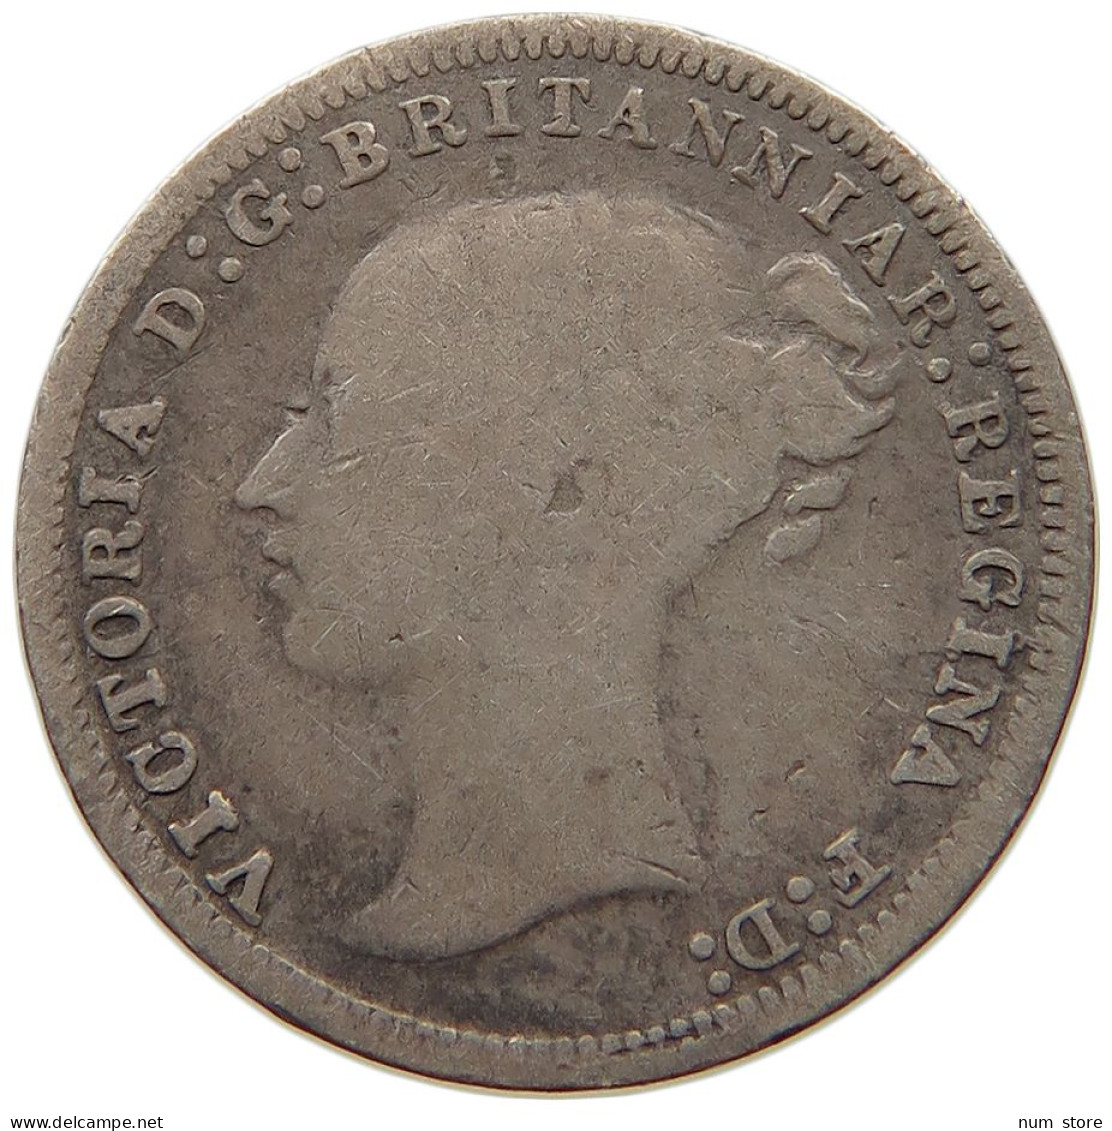 GREAT BRITAIN THREEPENCE 1875 Victoria 1837-1901 #c052 0267 - F. 3 Pence